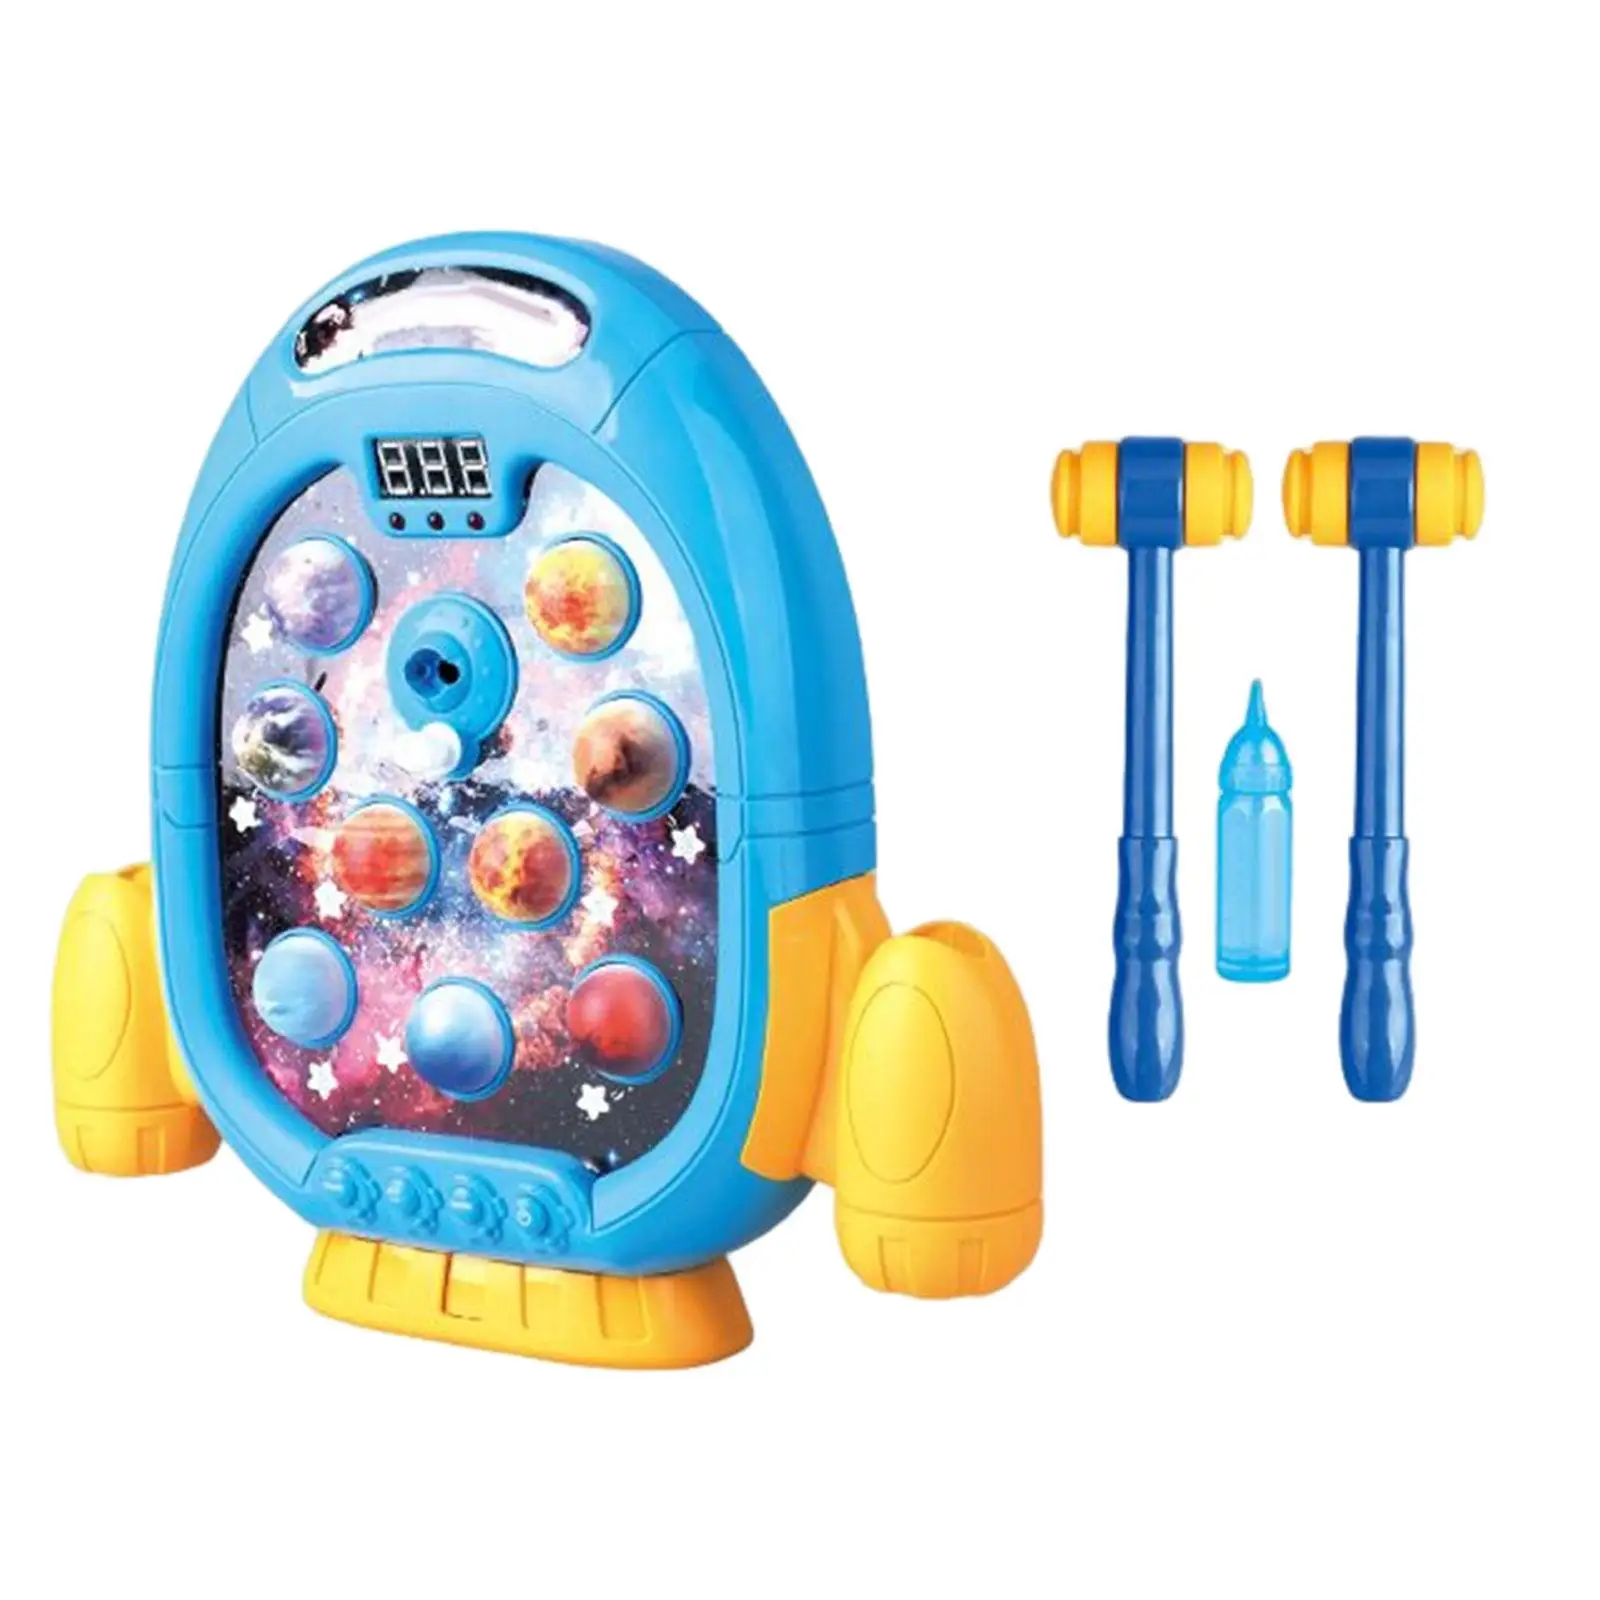 Musical Toys Percussion Toy for Hammering Pounding Age 3,4 Year Old Boy